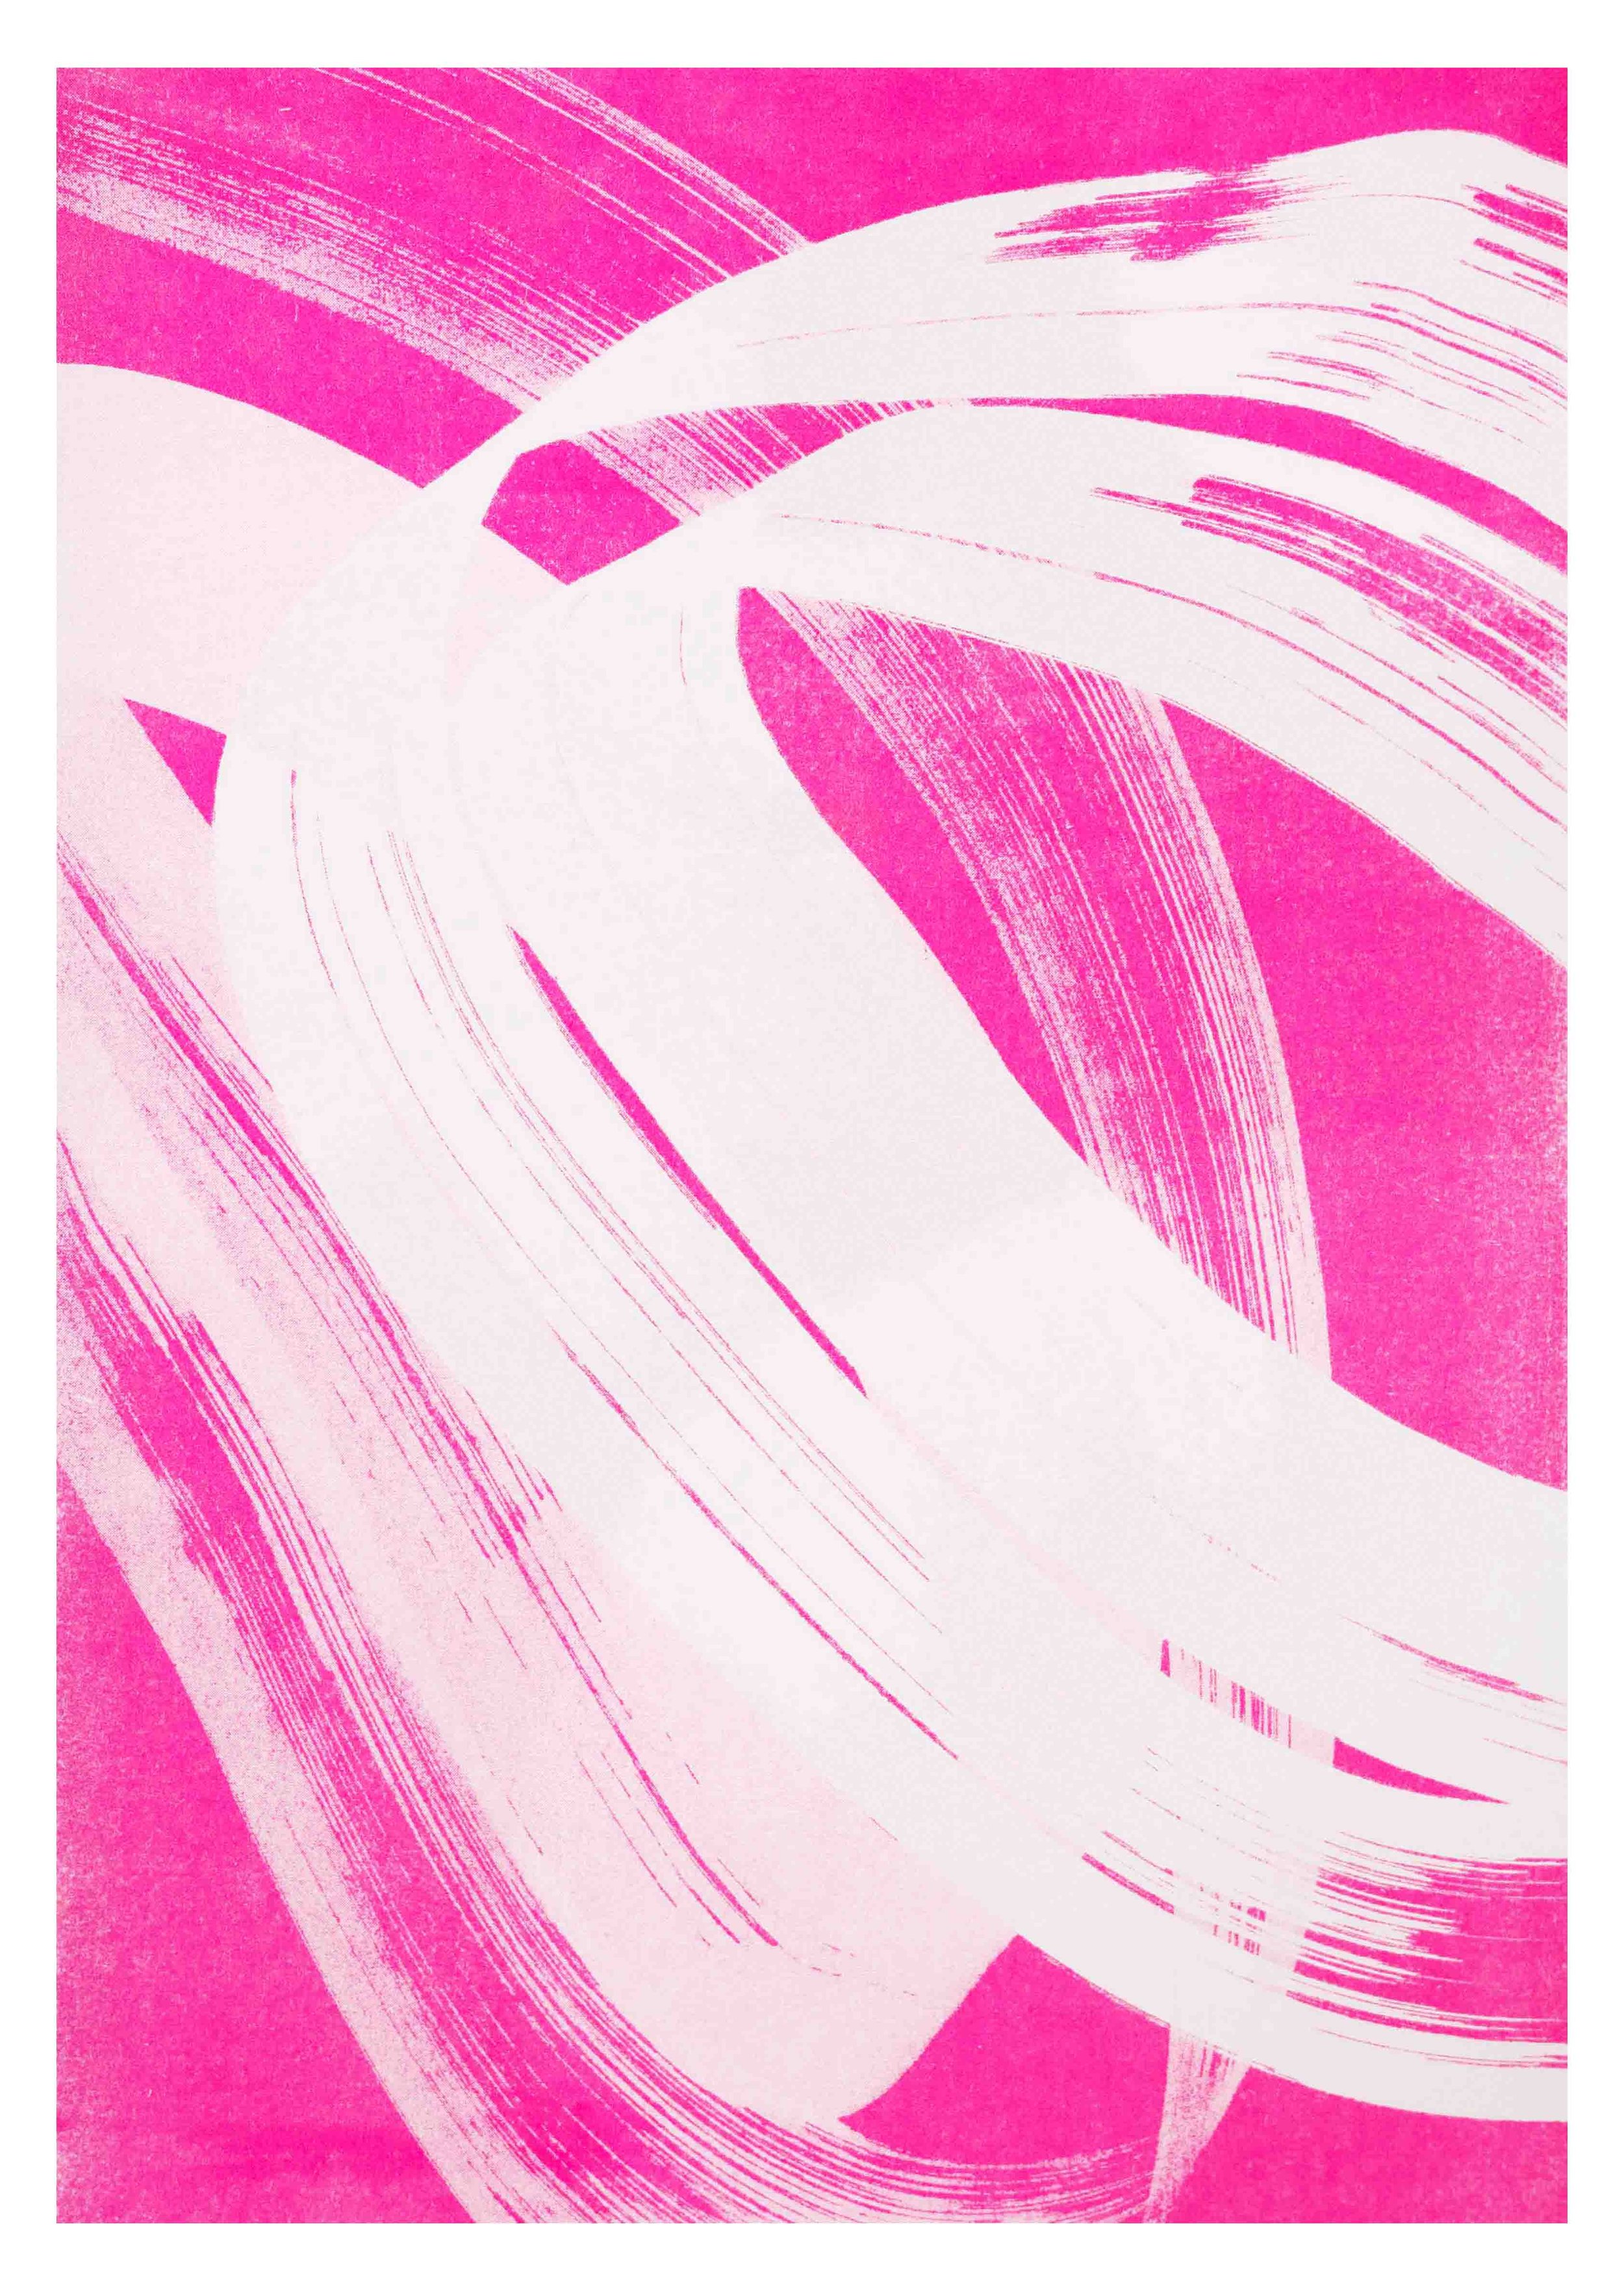  Untitled, 2023 risograph print on paper 42,0 x 29,7 cm (2-23) 